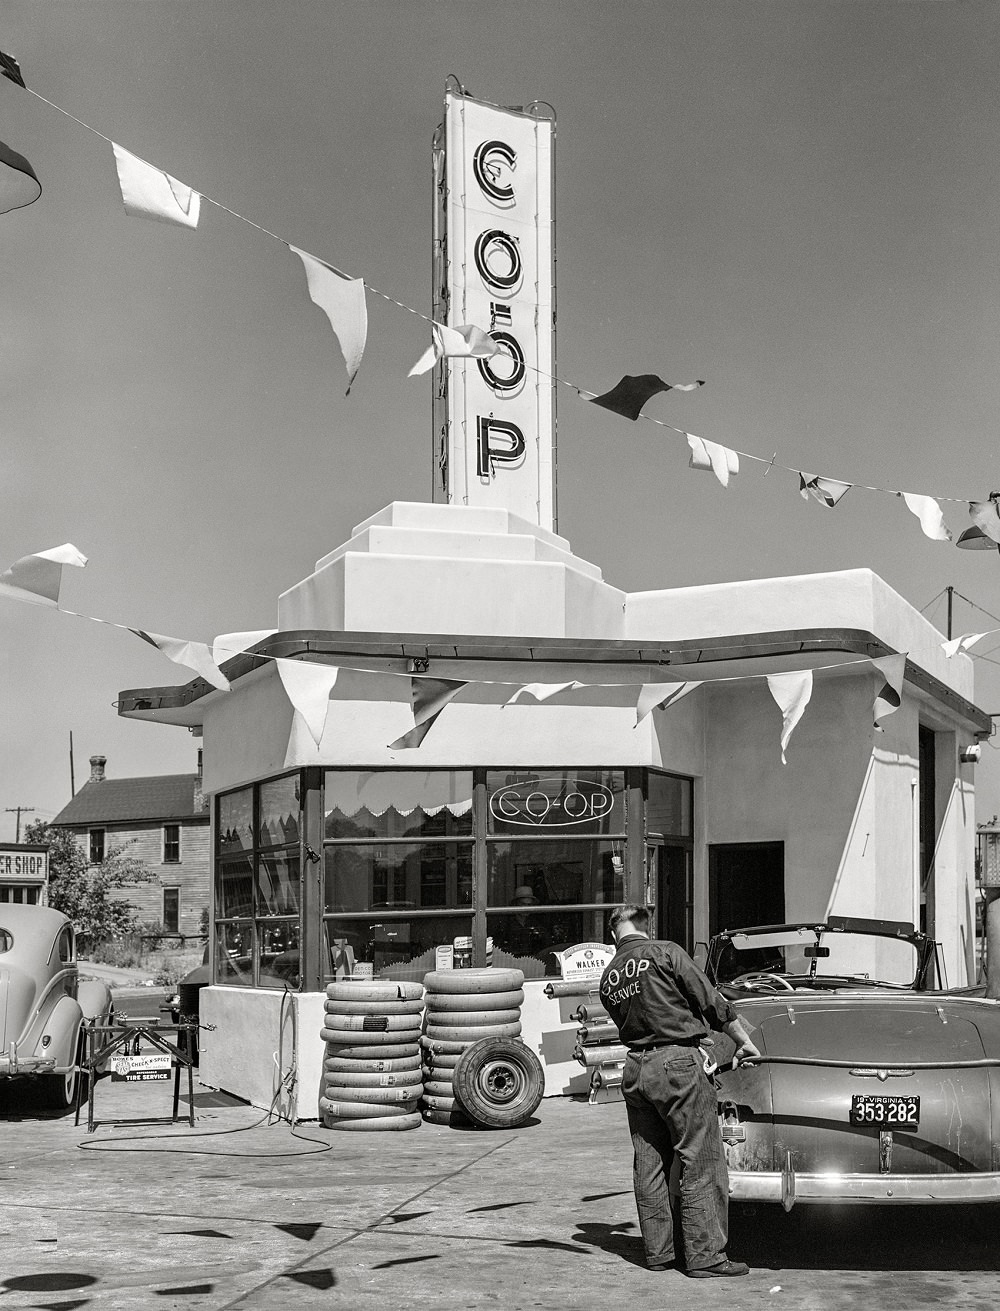 Cooperative gas station in Minneapolis, Minnesota, August 1941